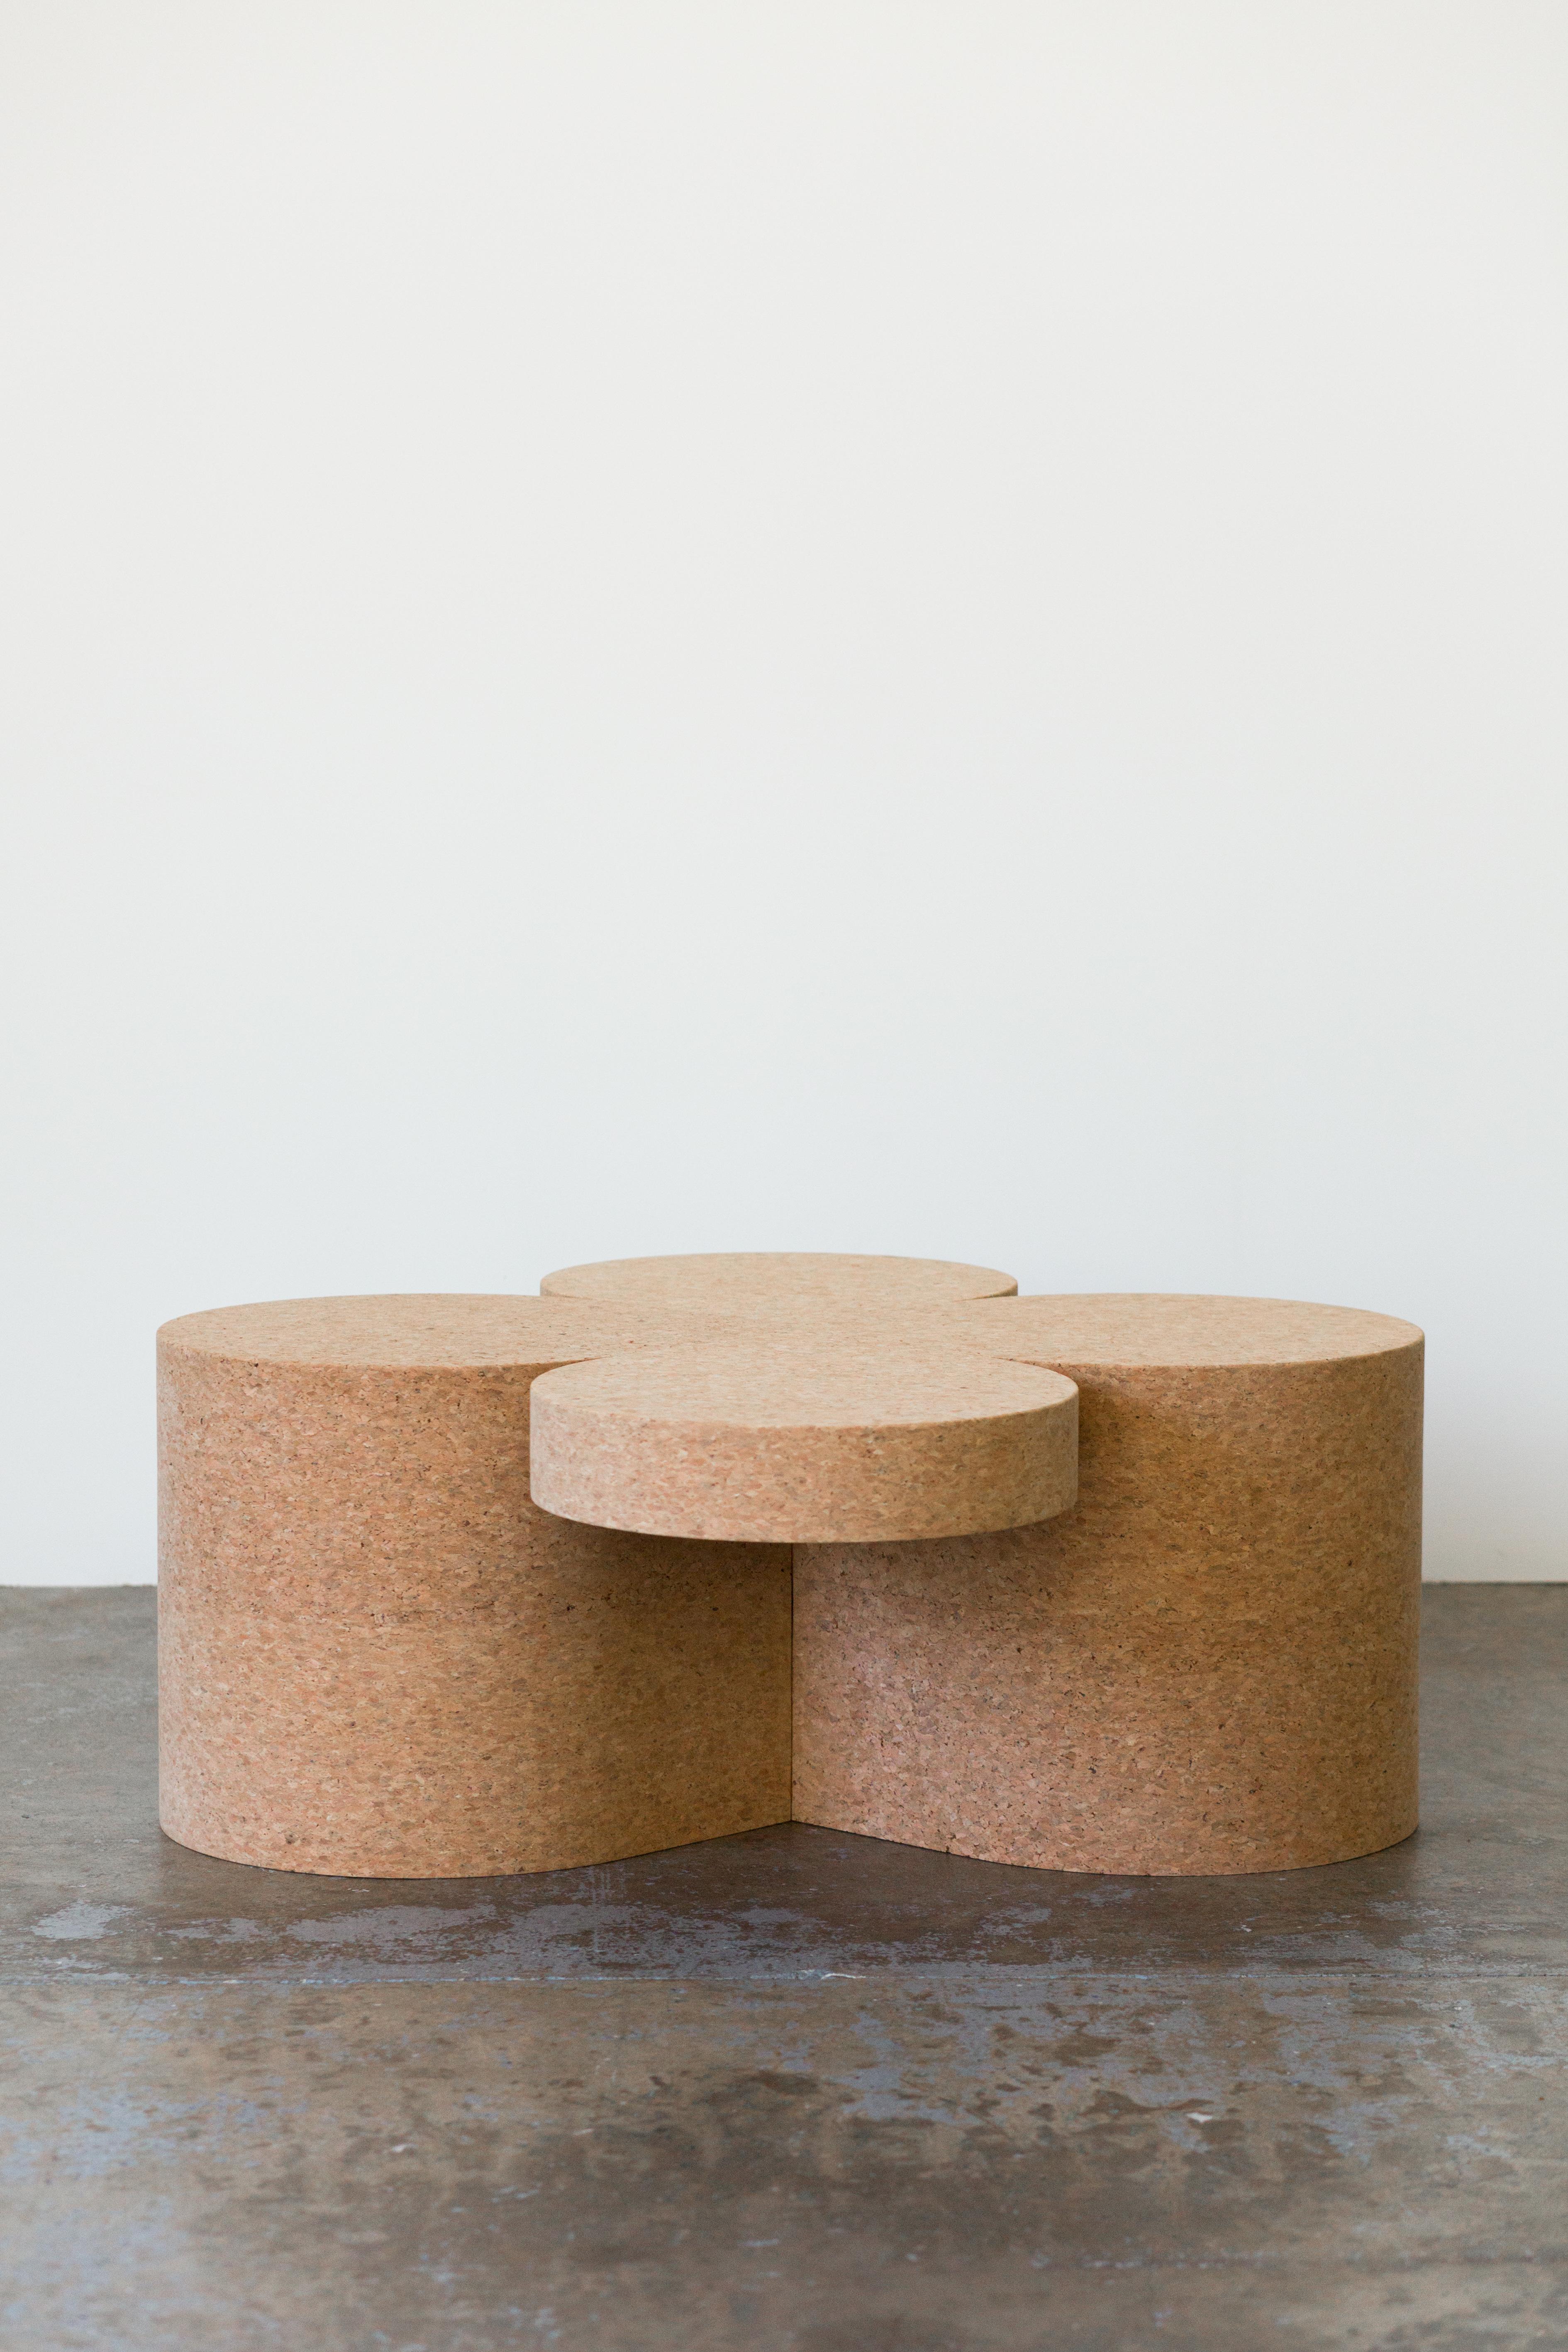 Clover Solid Cork Contemporary Sculptural Carved Coffee Table Natural In New Condition For Sale In Bainbridge Island, WA